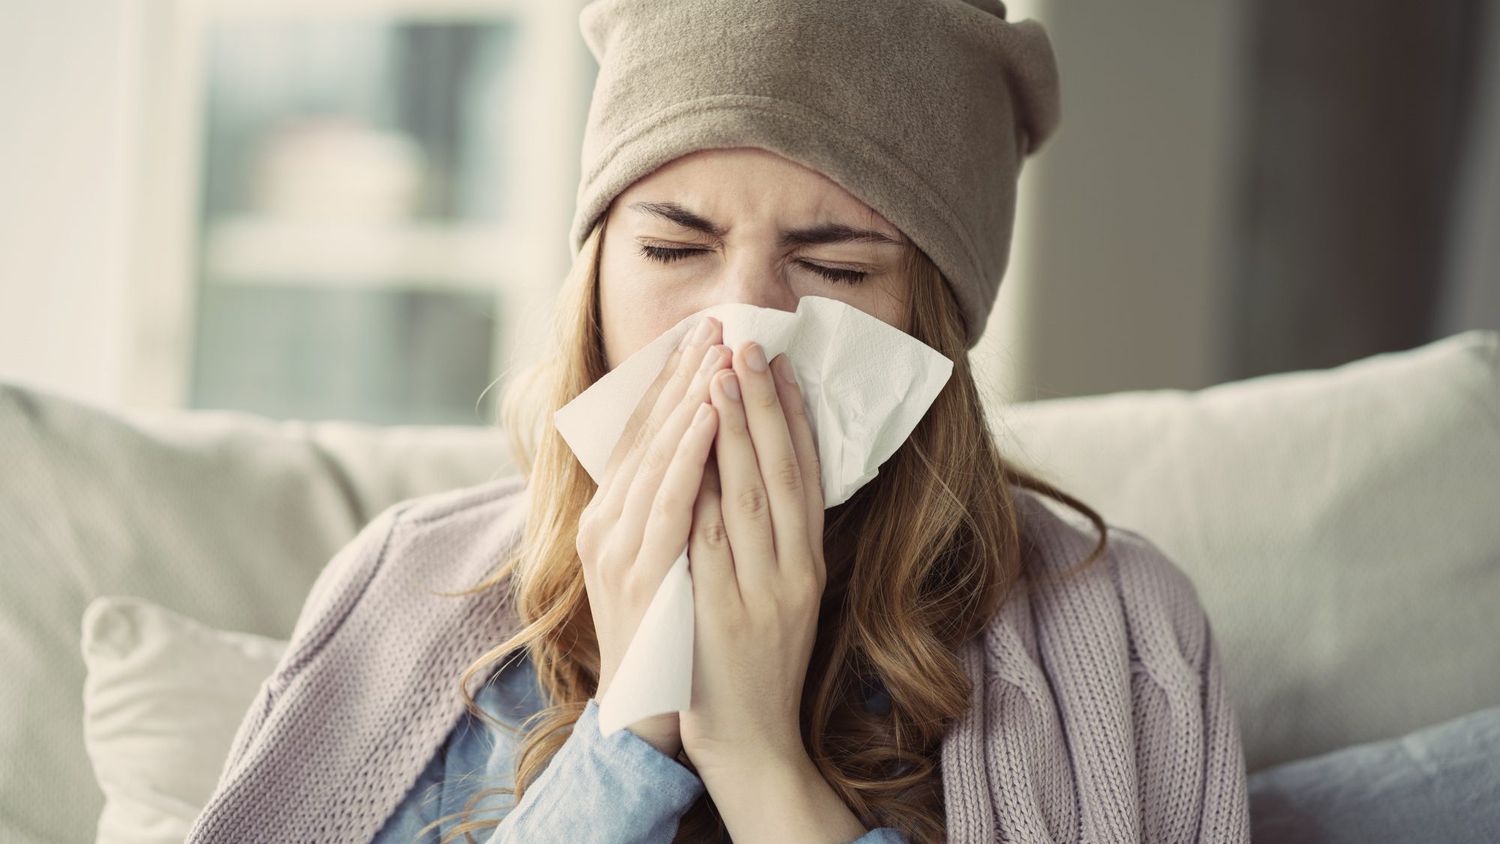 8 Tips To Prevent Winter Cold And Flu